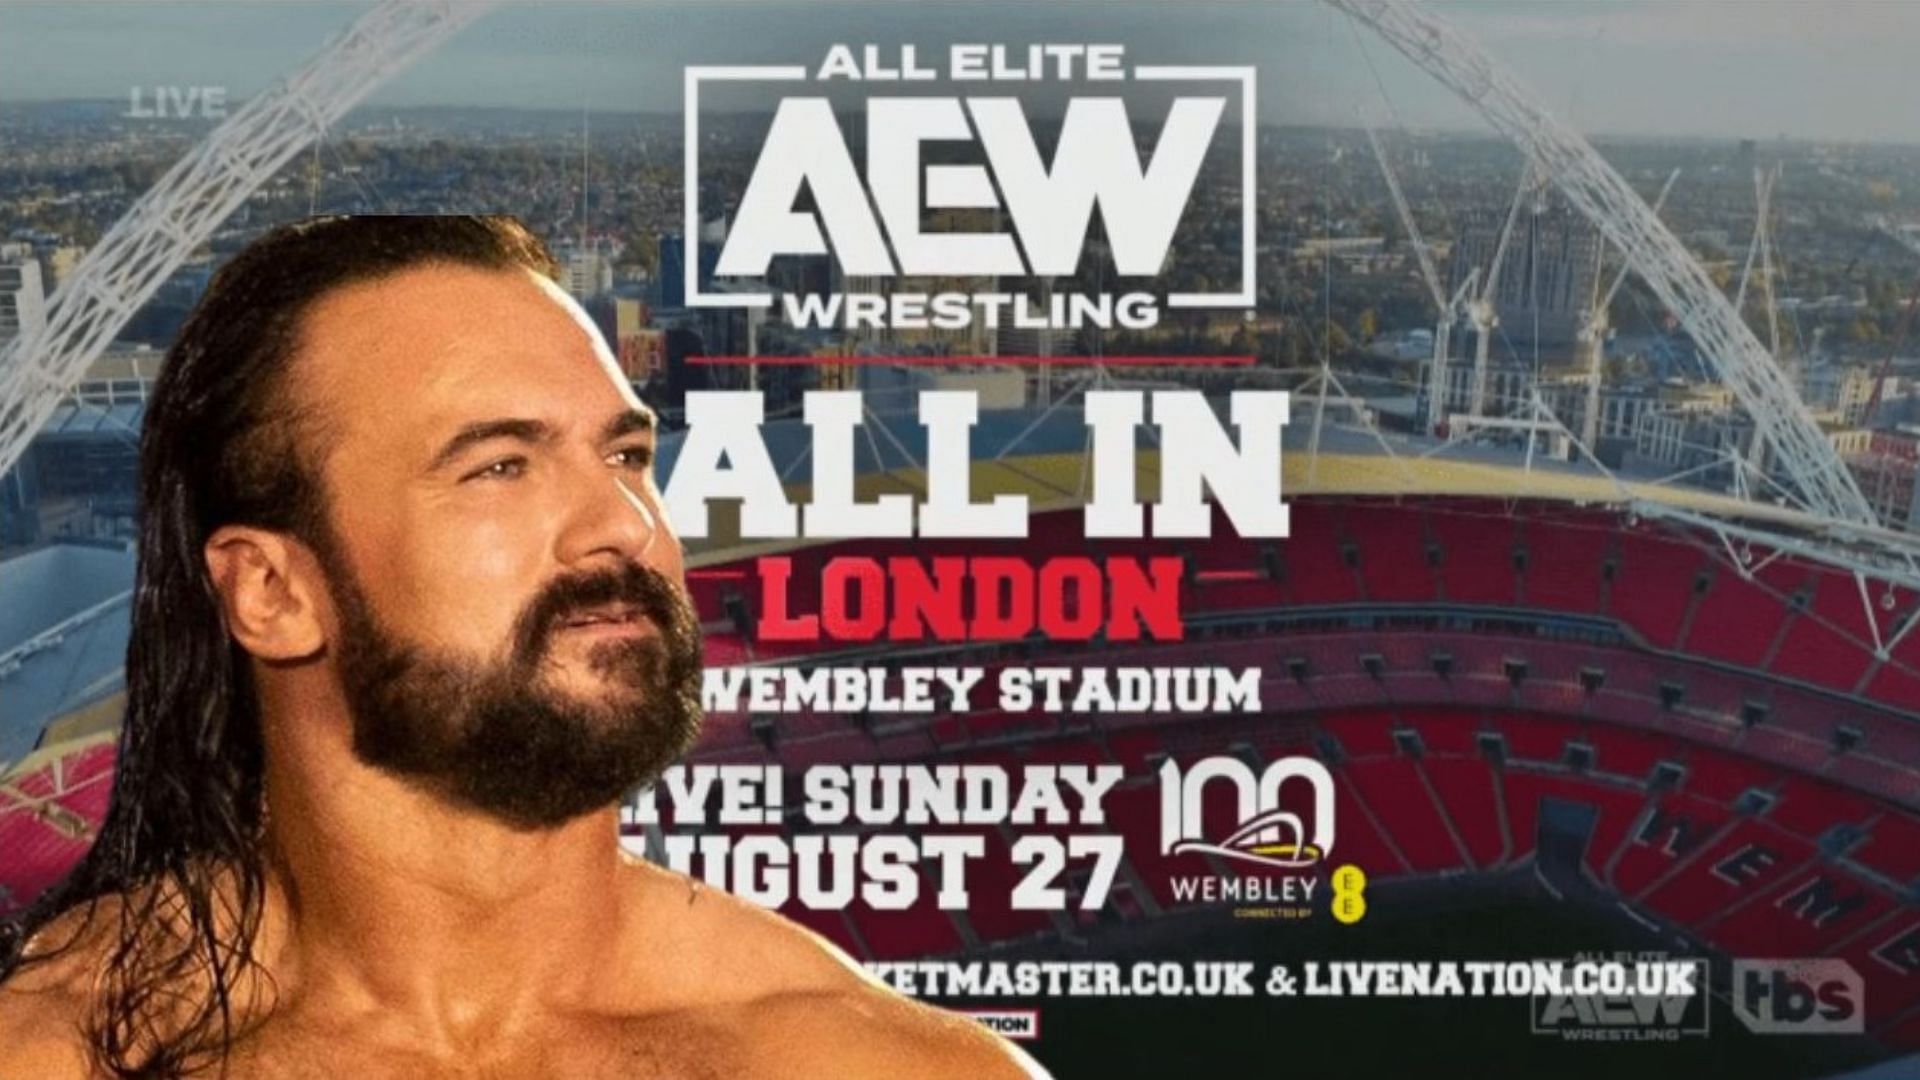 Will The Scottish Psychopath potentially debut during AEW All-In?